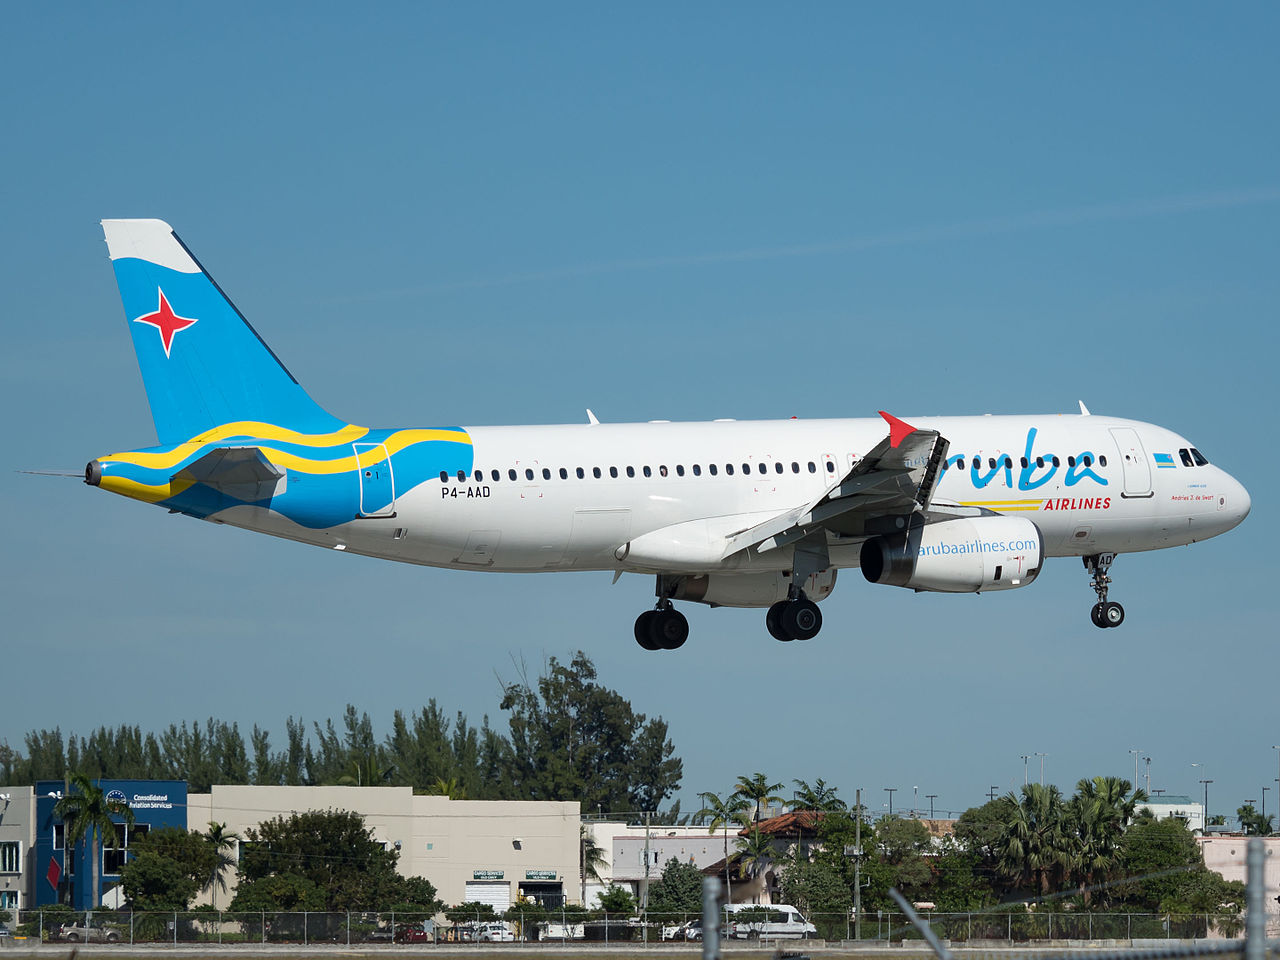 An Aruba Airlines Airbus lands at Miami Airport.